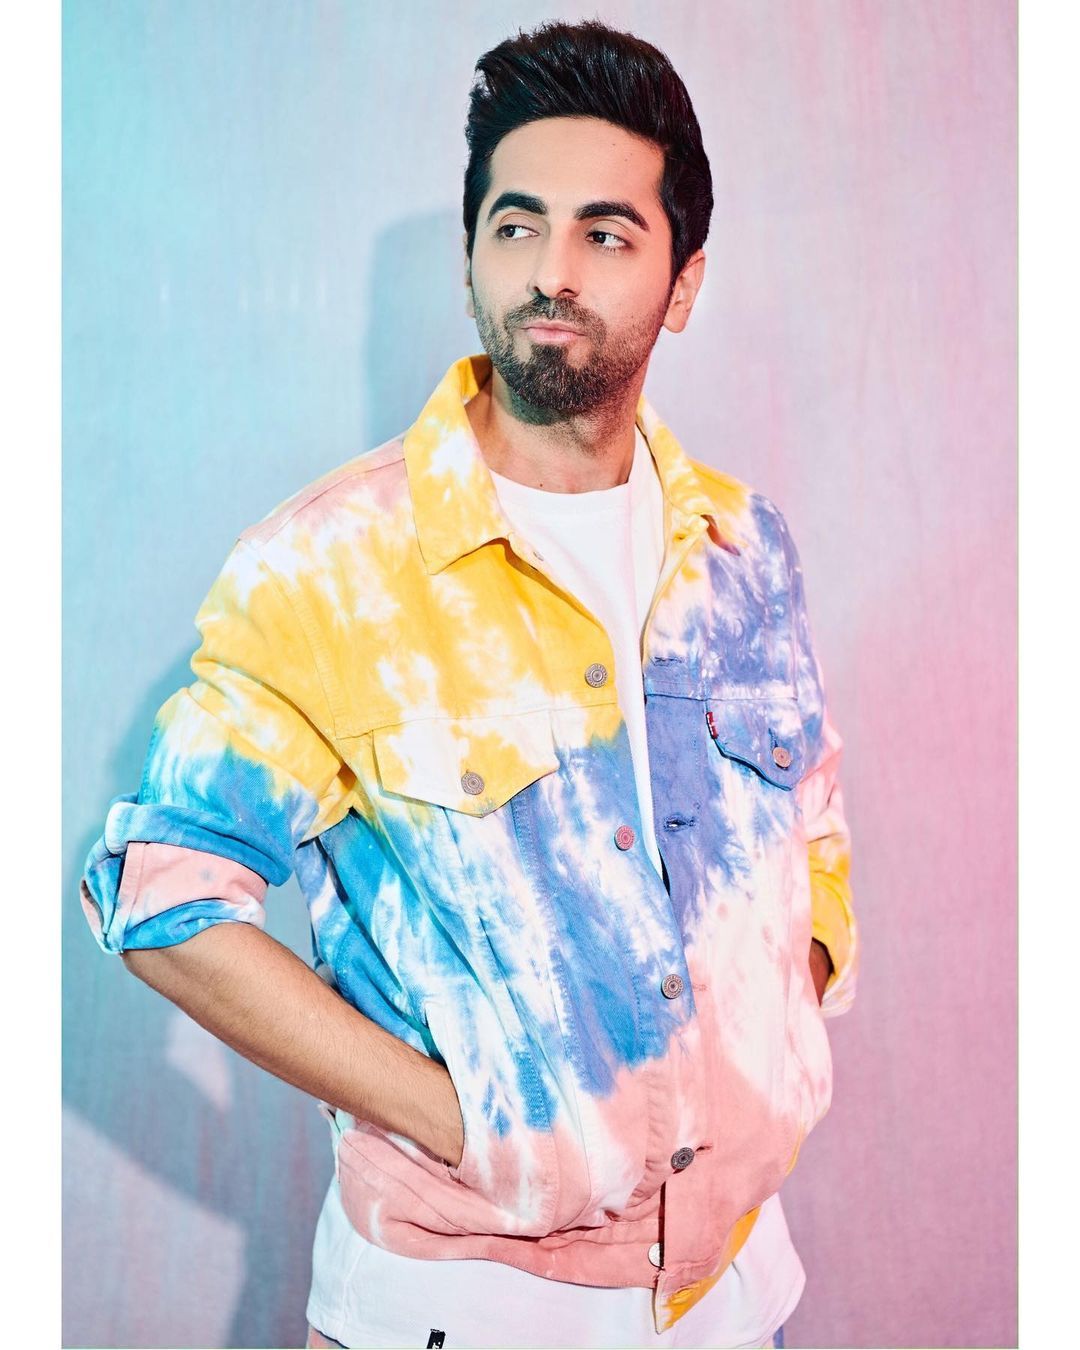 Ayushmann Khurrana Committed To Ending Violence Against Children, Says Covid-19 Has Made Children More Vulnerable